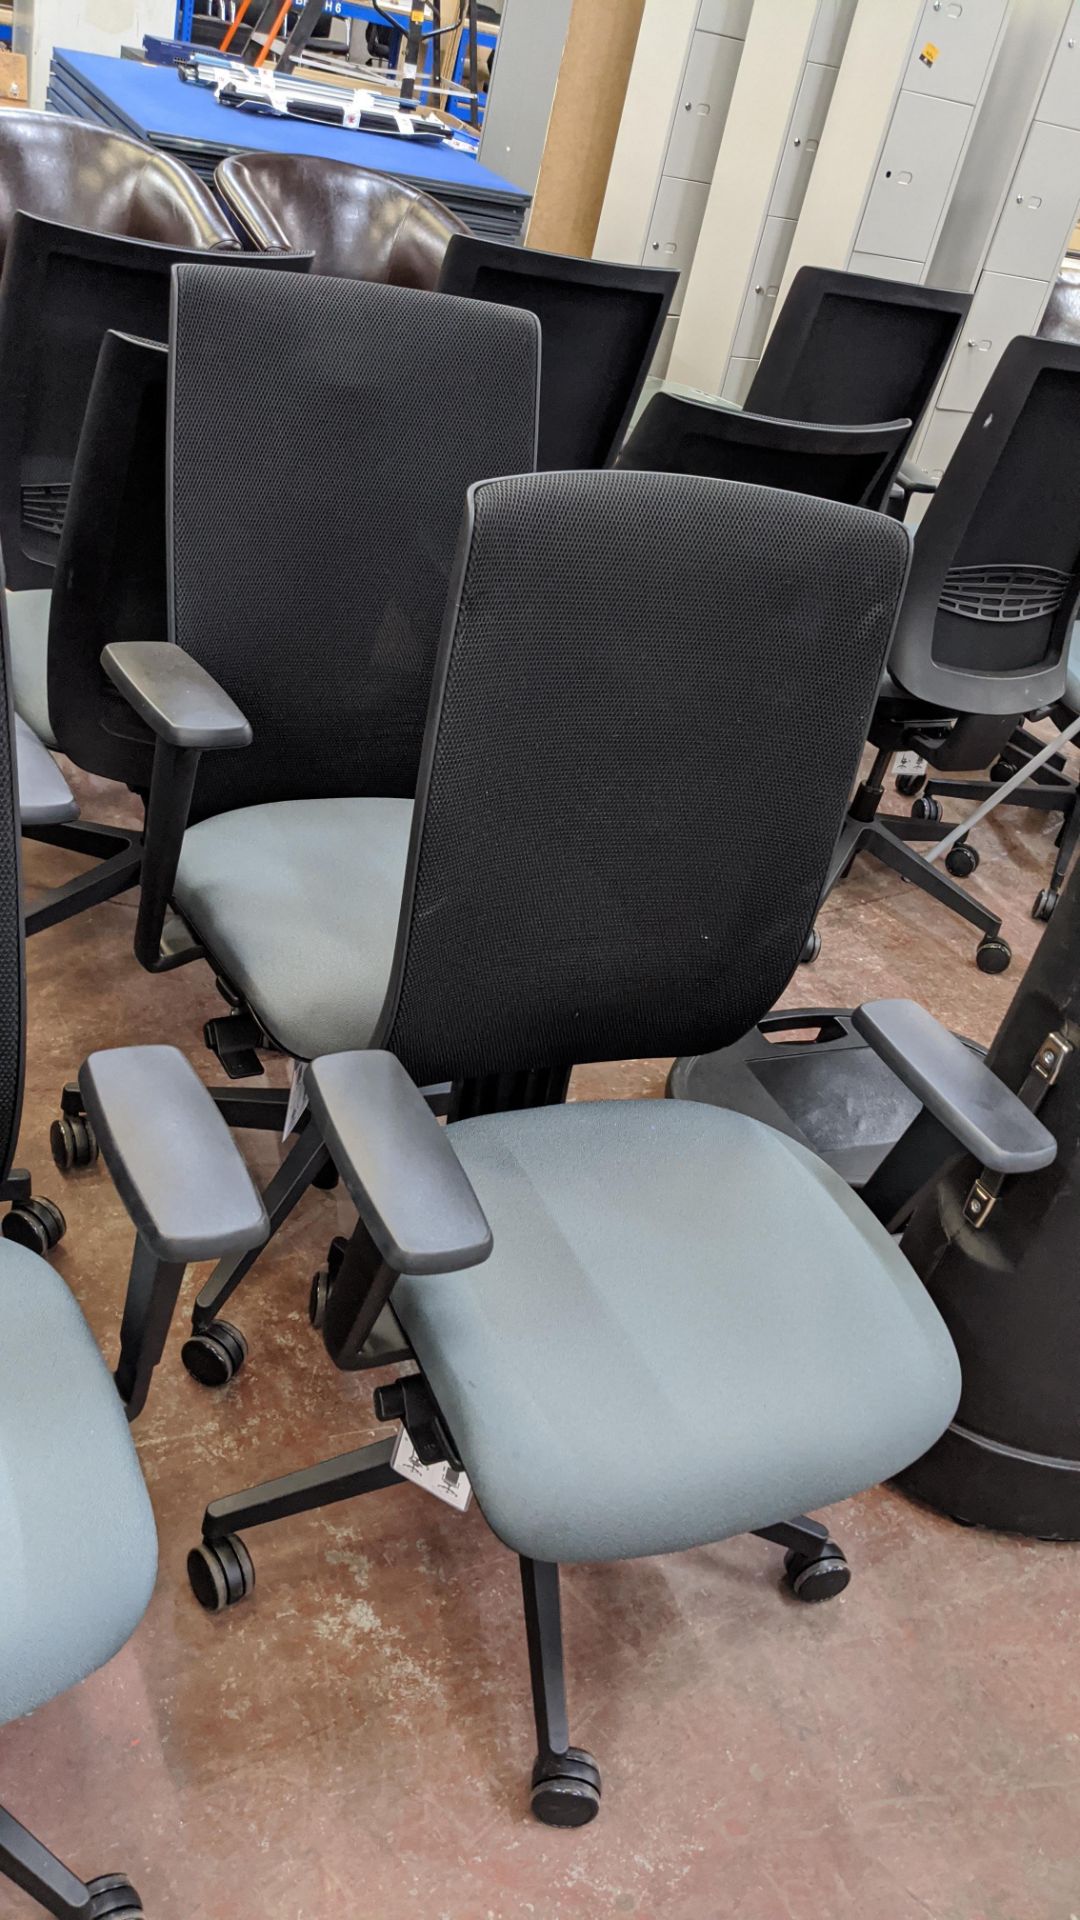 6 off Edge Design modern office chairs with arms, incorporating green/grey fabric seat bases & black - Image 6 of 10